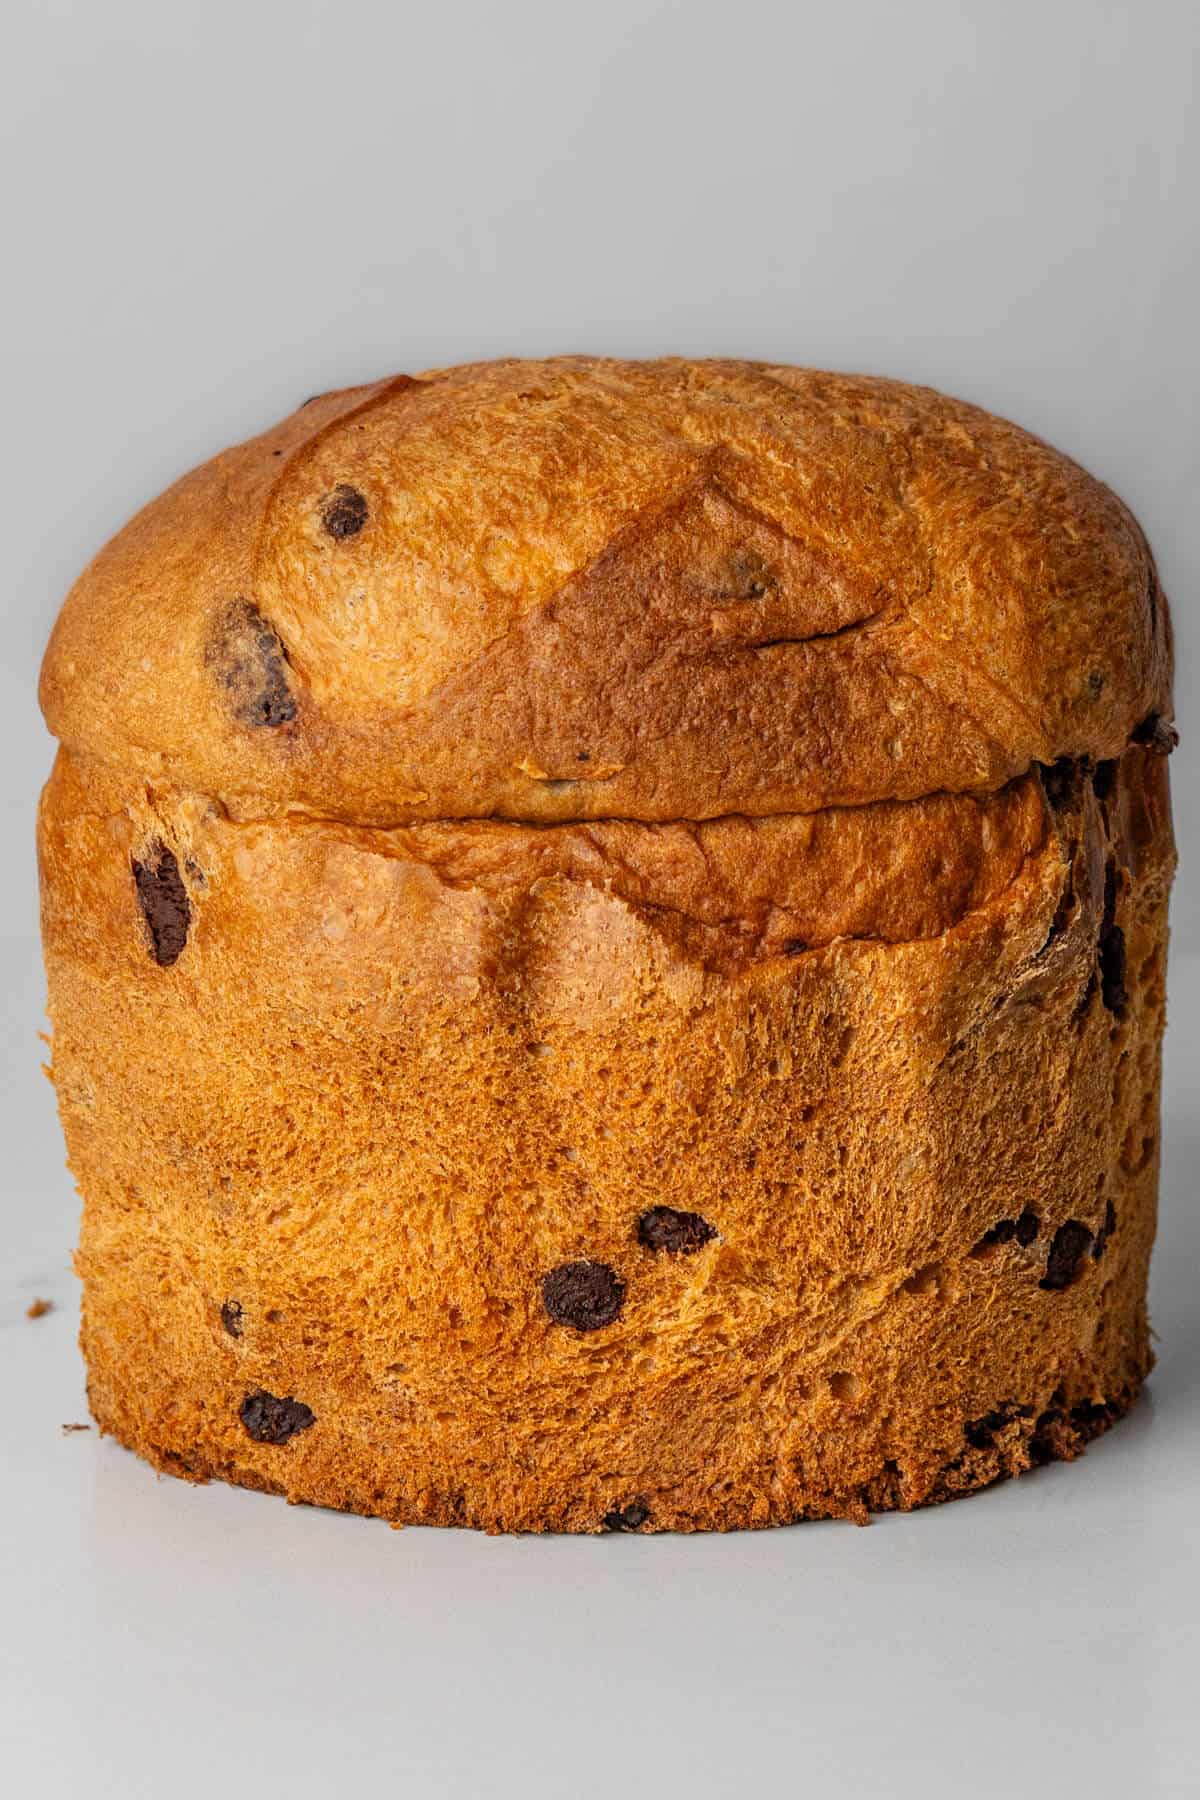 A loaf of panettone before it's sliced